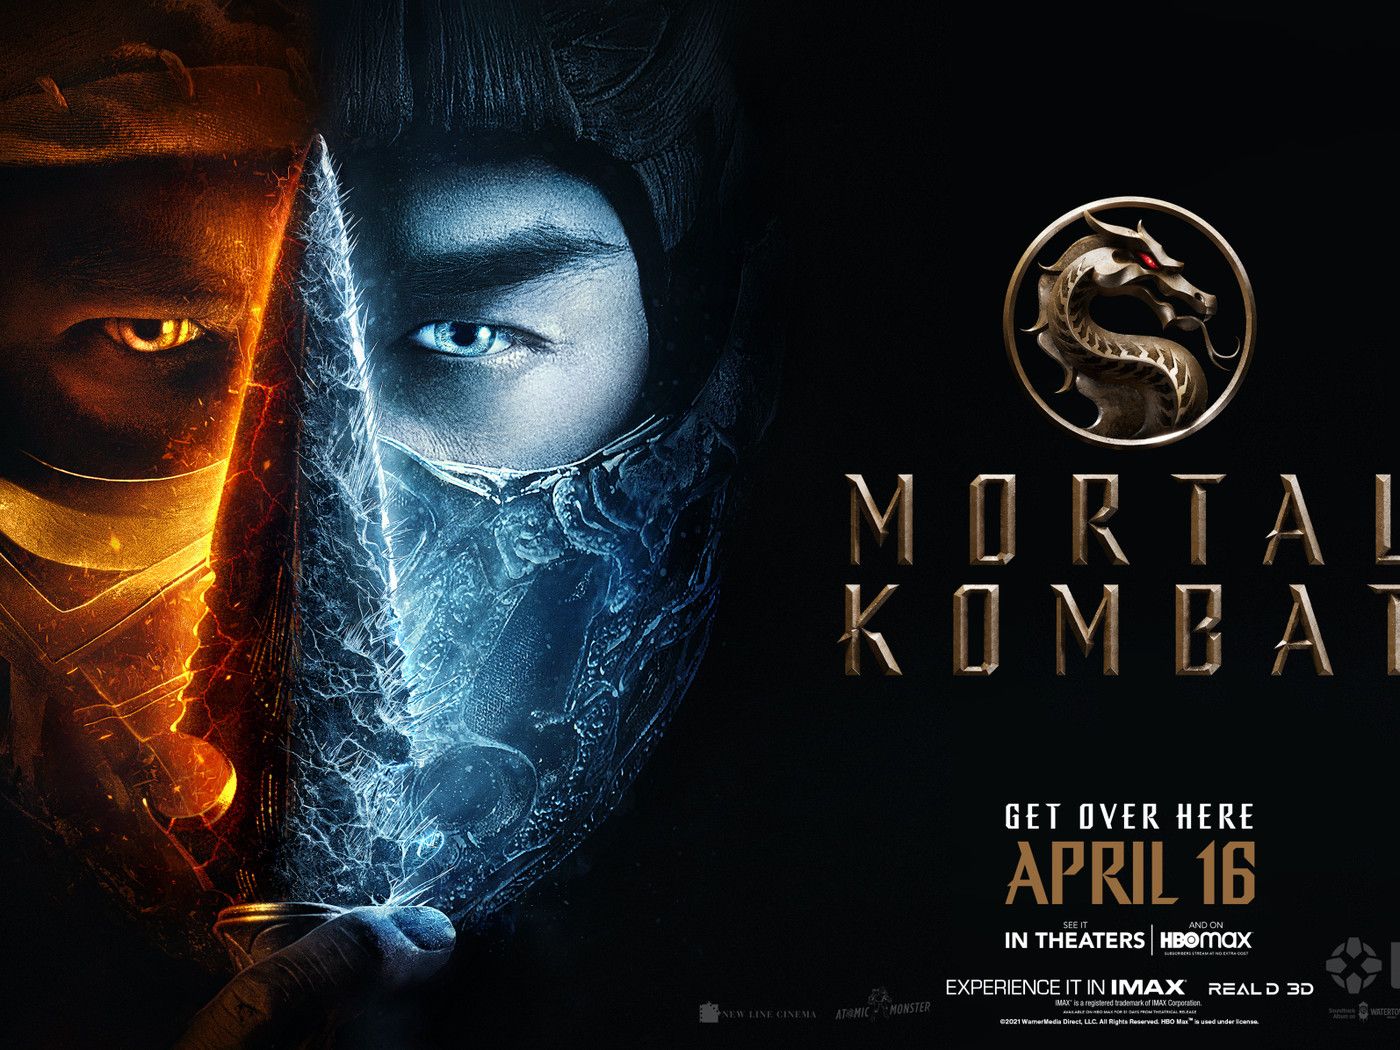 Video: The trailer for the Mortal Kombat reboot has been released